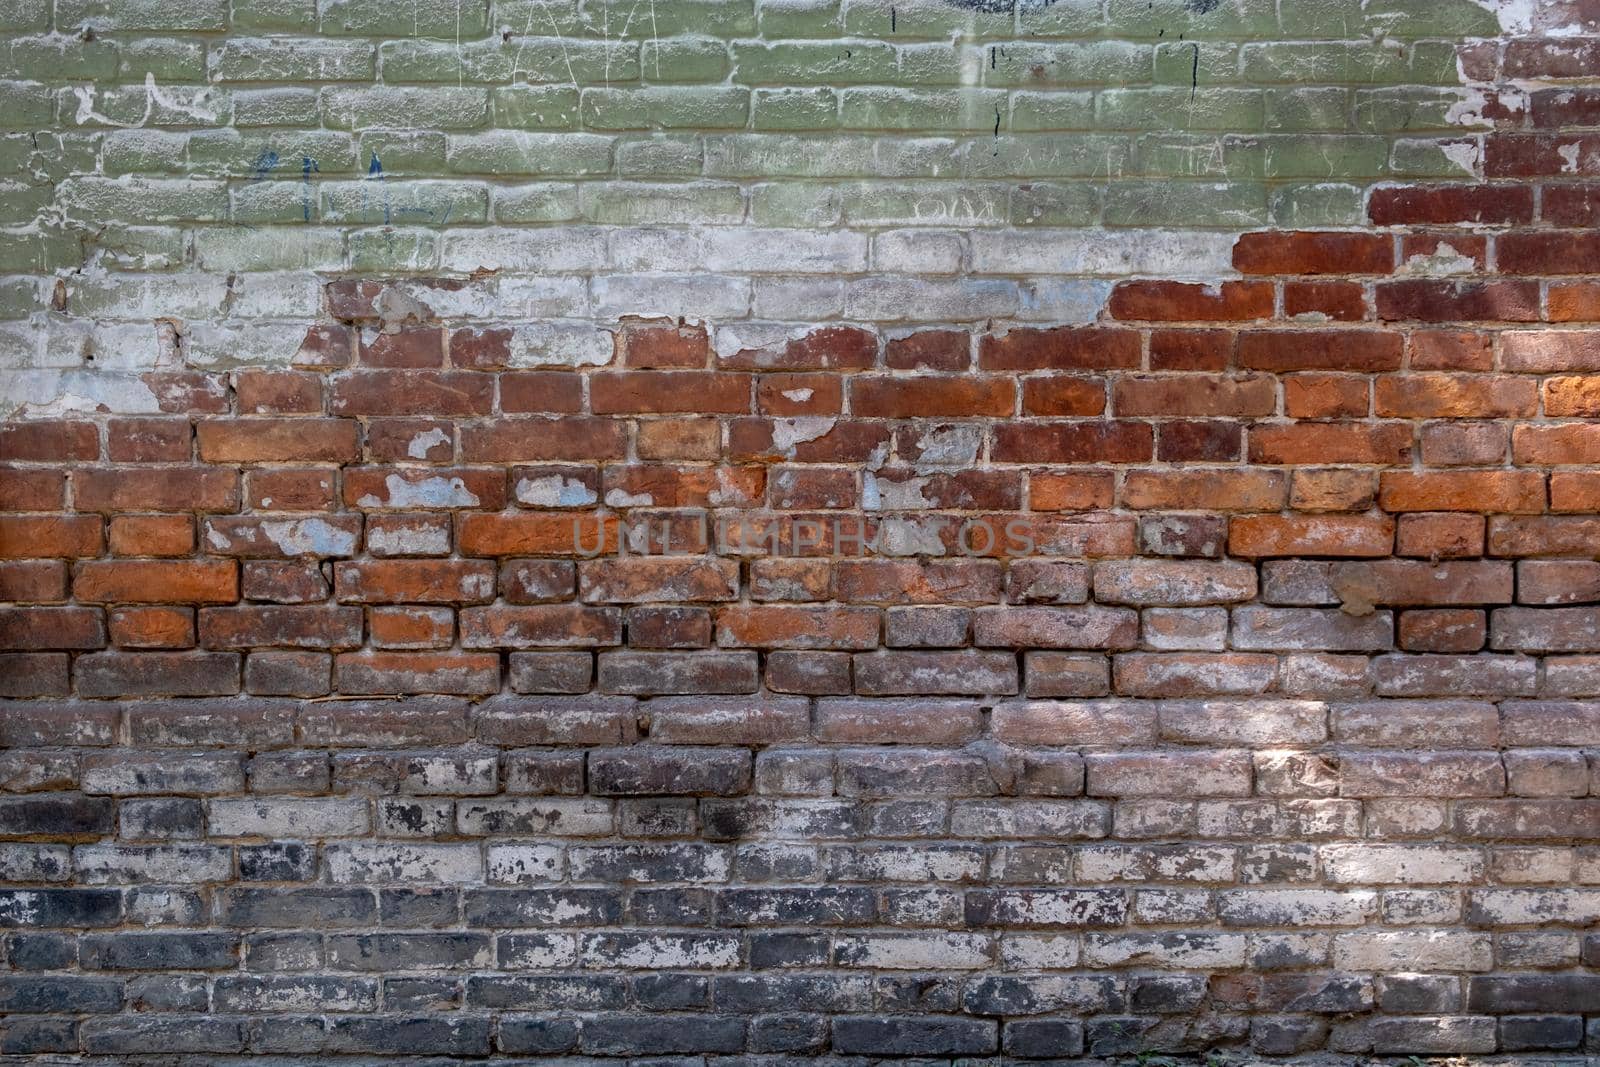 old brick wall background. green, red, gray colors brick wall texture background. wallpaper design